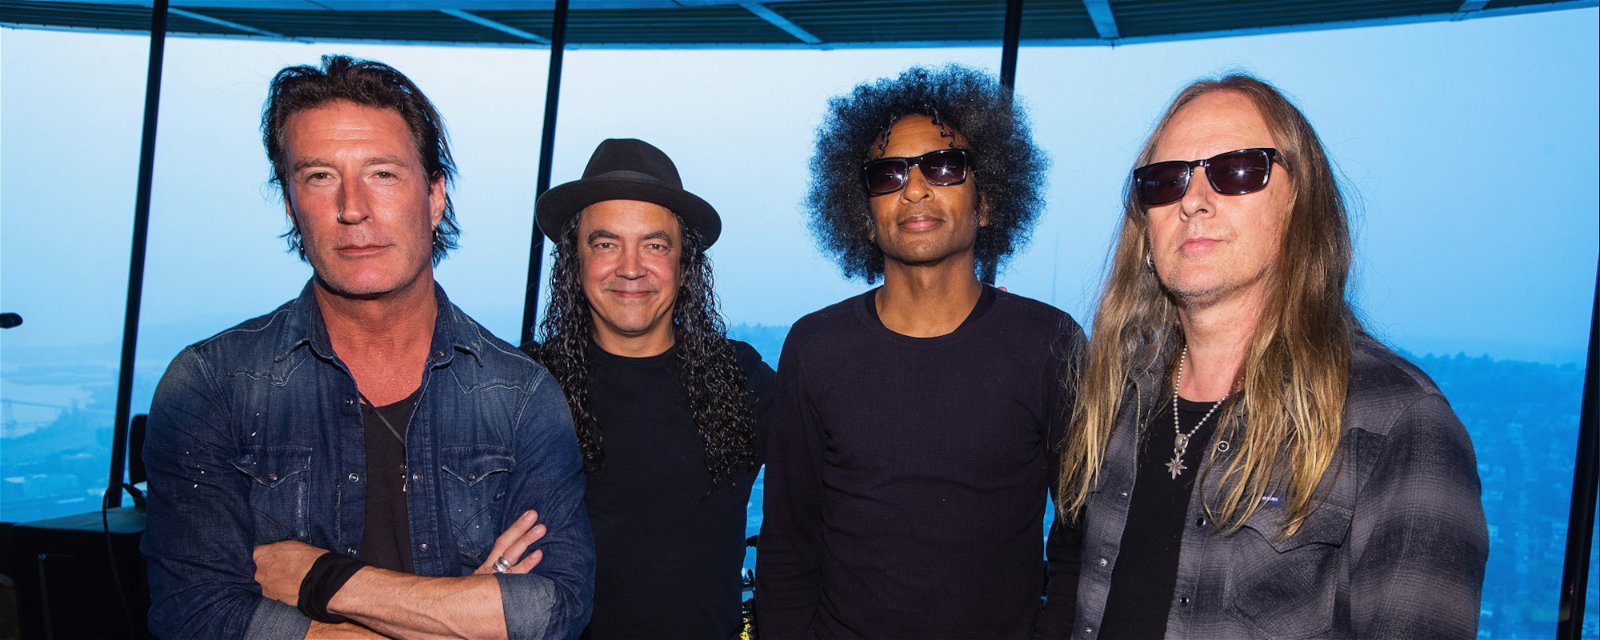 The greatest Alice In Chains songs ever, picked by members of